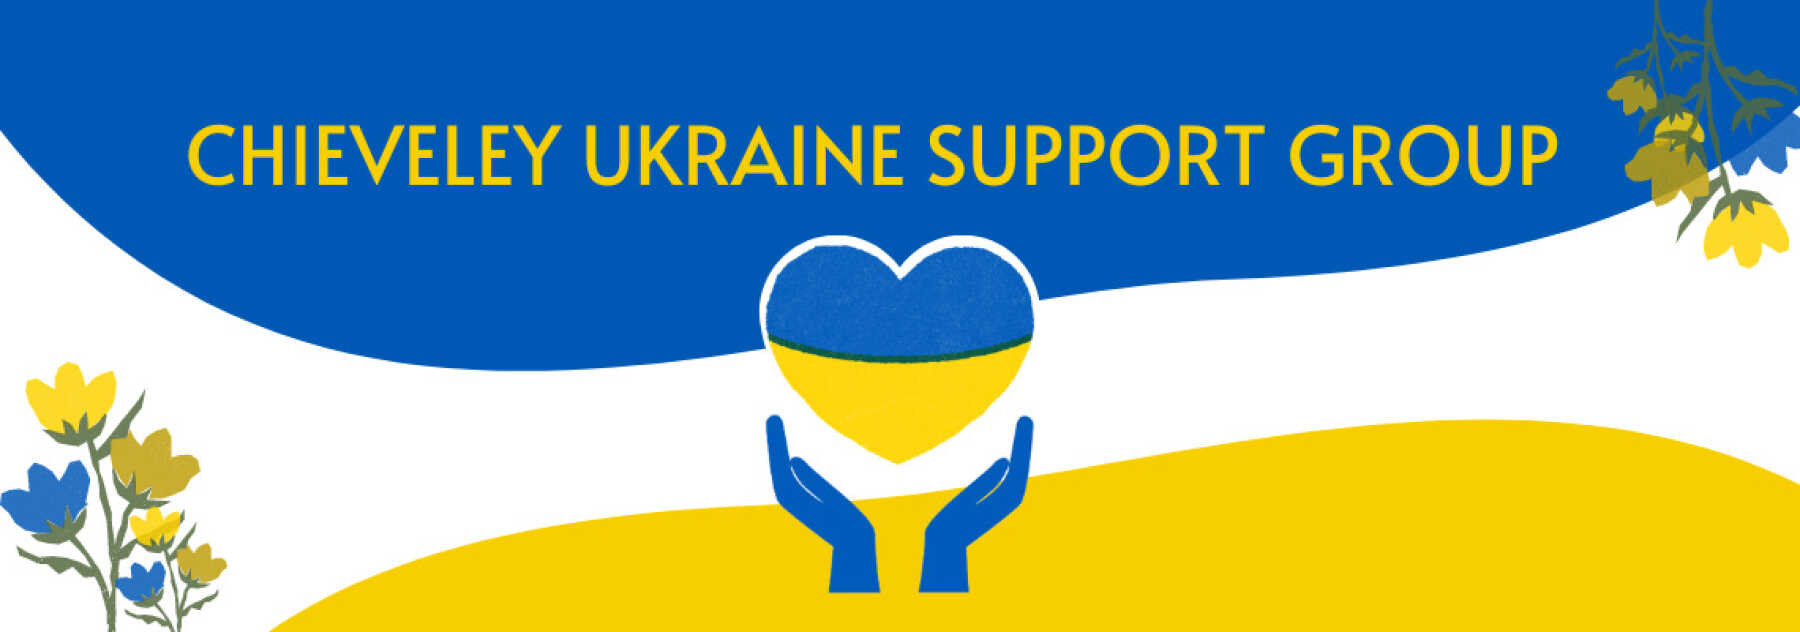 Featured Image for CHIEVELEY UKRAINE SUPPORT GROUP